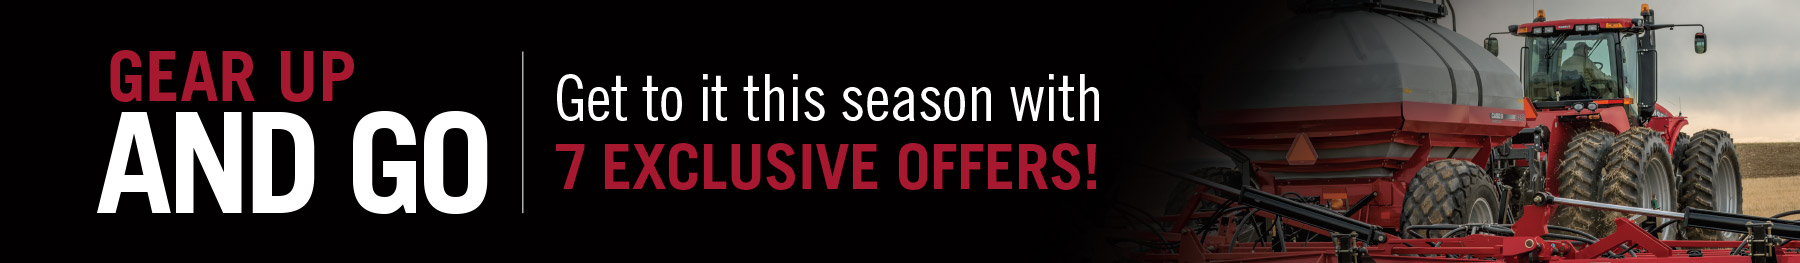 Gear Up and Go | Get to it this season with exclusive offers!